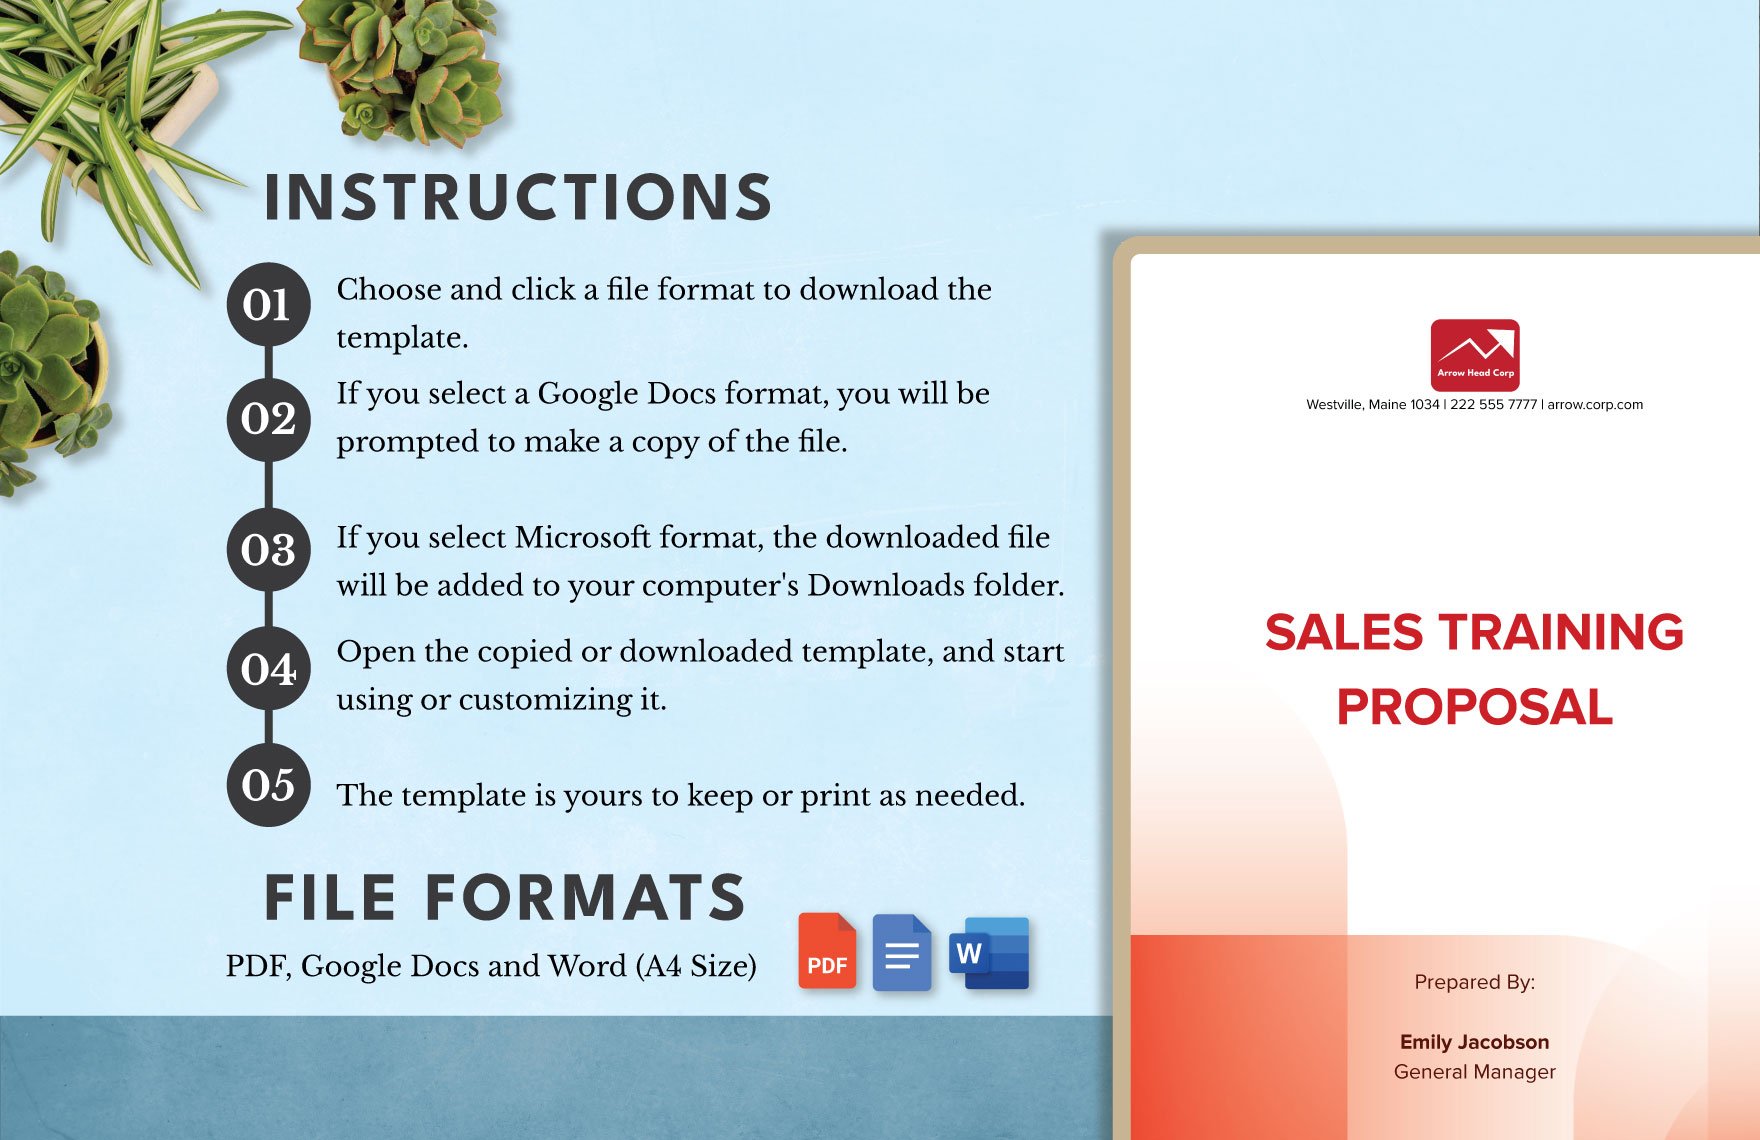 Sales Training Proposal Template